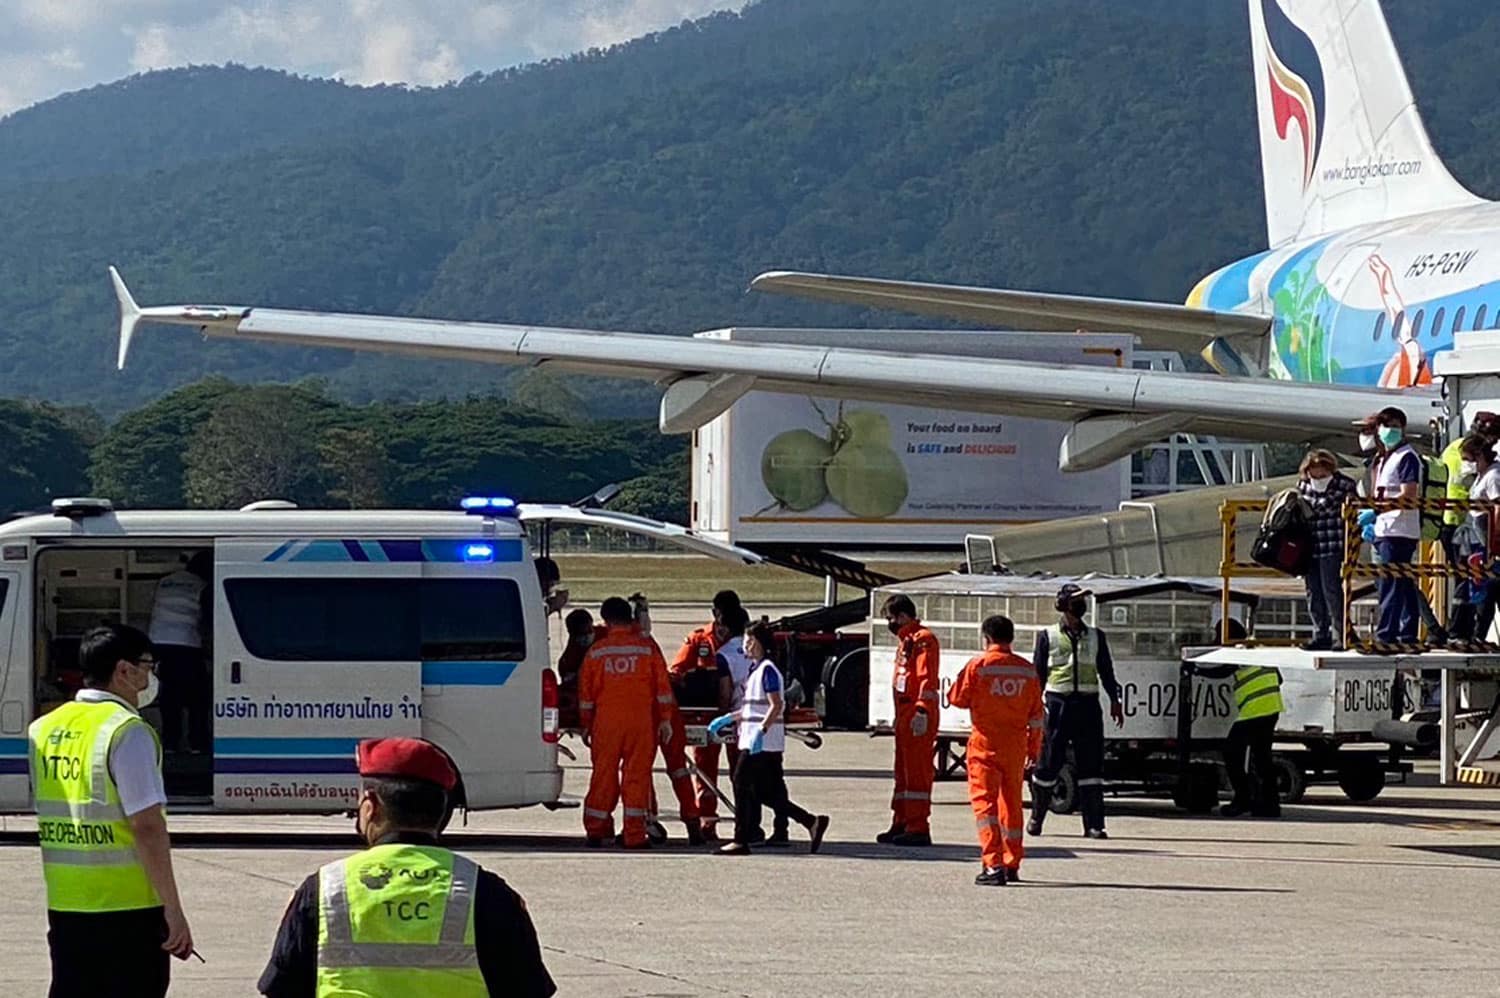 American Tourist, 63 Rescued and Given CPR on Chiang Mai Flight